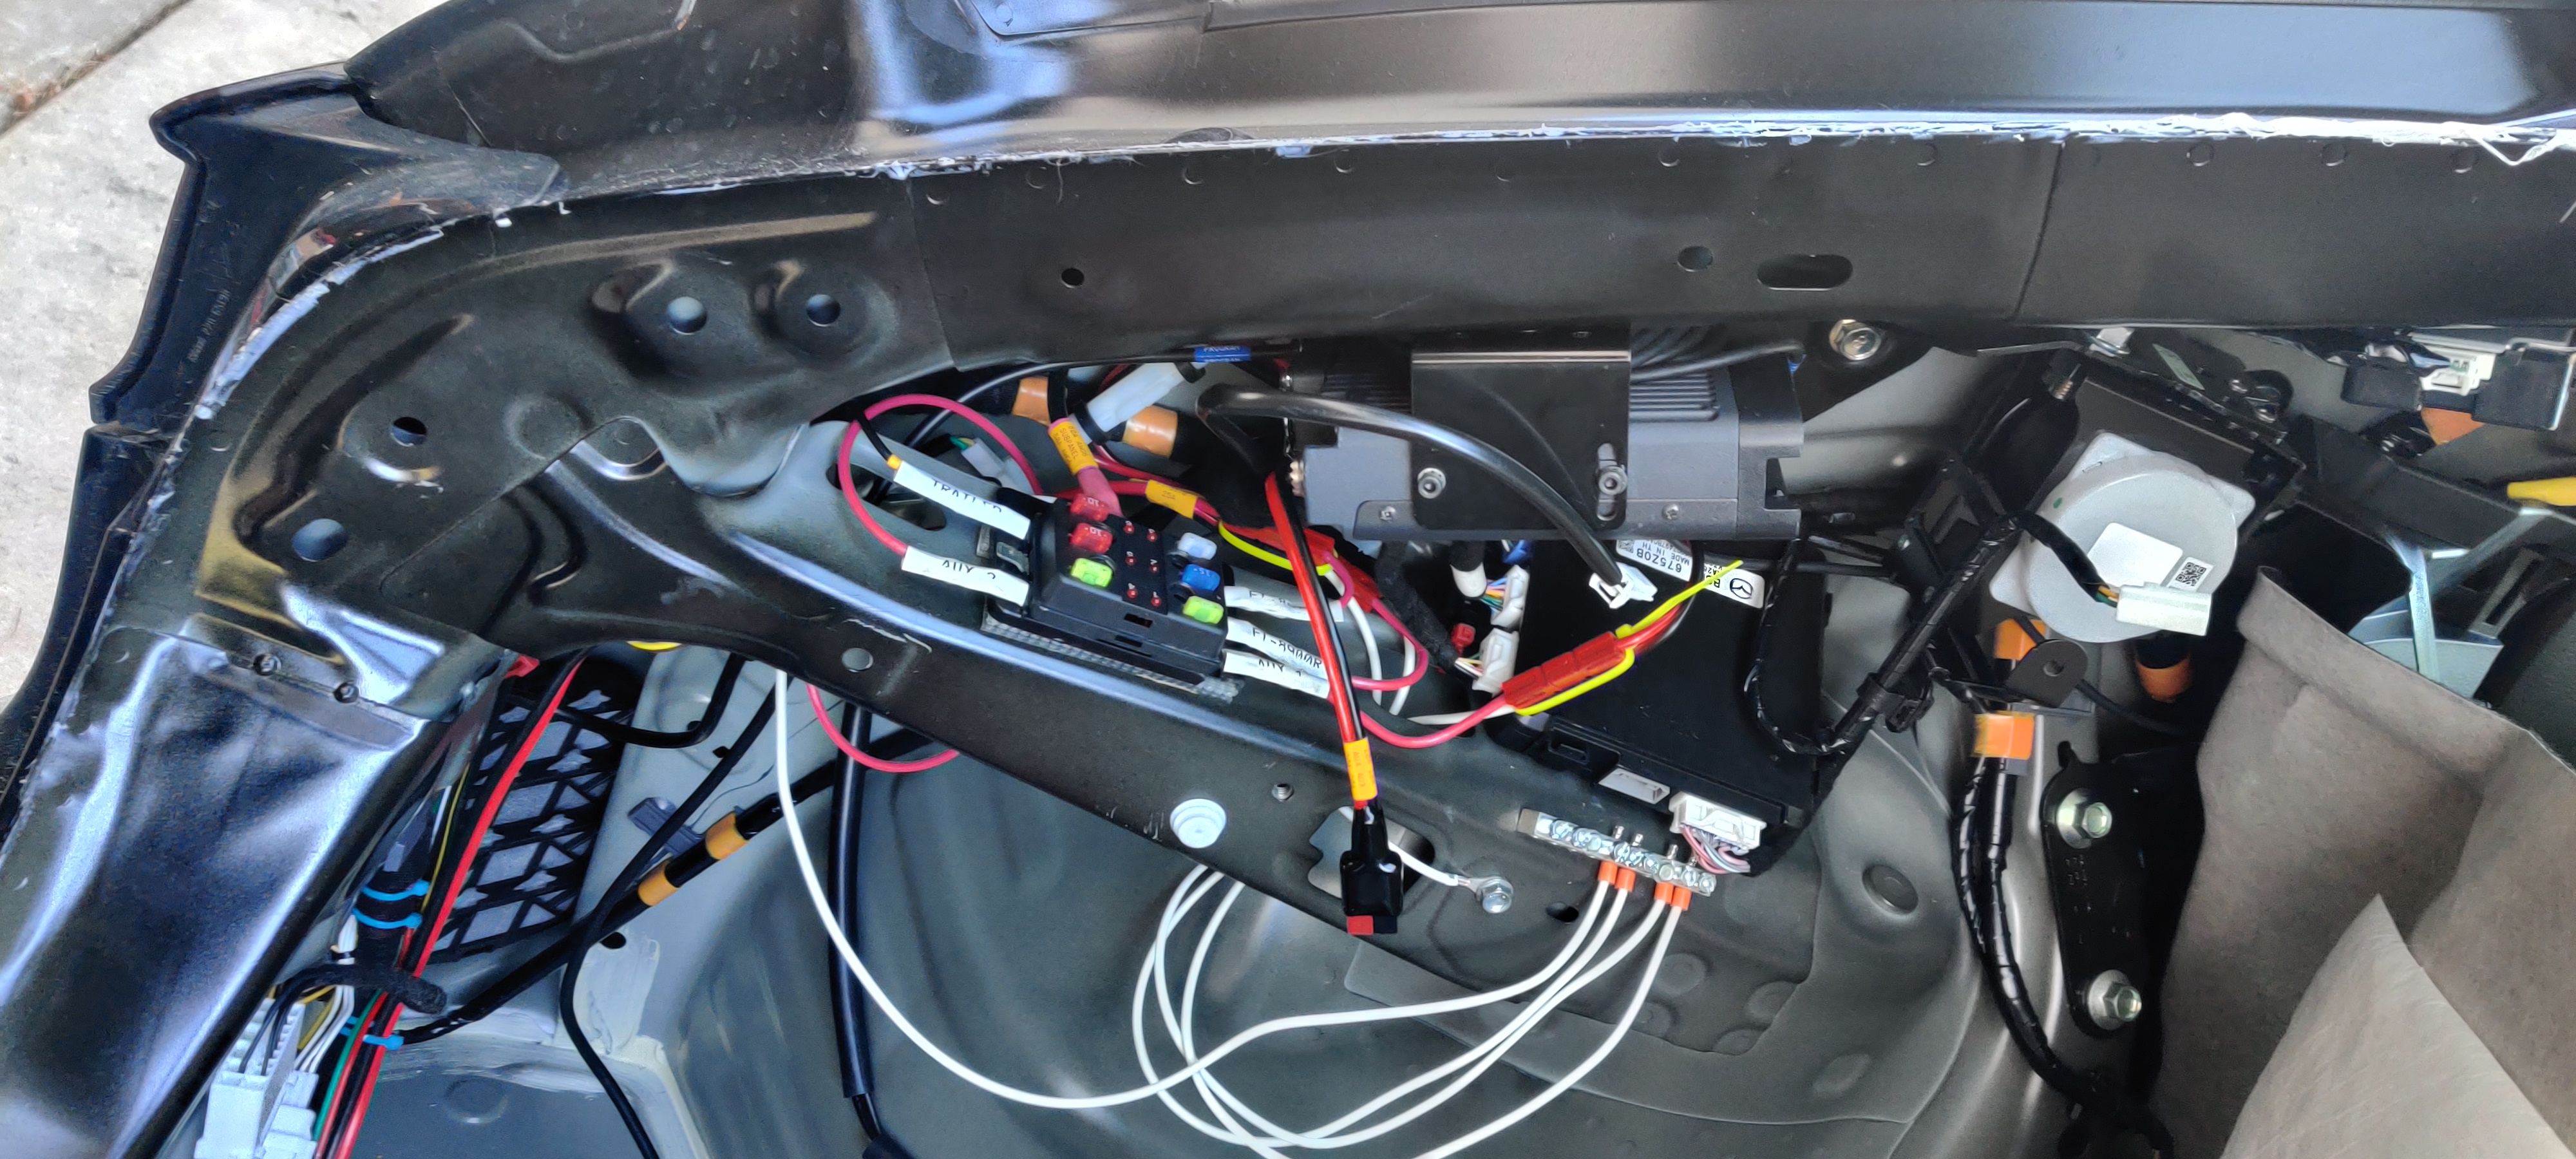 FT-8900R mounted on diagonal frame rail over shelf and subpanel. White flying connector is for cargo area LED; flying PowerPole is 20A auxiliary for cargo area. Ziptied PowerPole over OEM module is feed for FT-857D on the other side of the car; the one under the FT-8900R is for that radio.